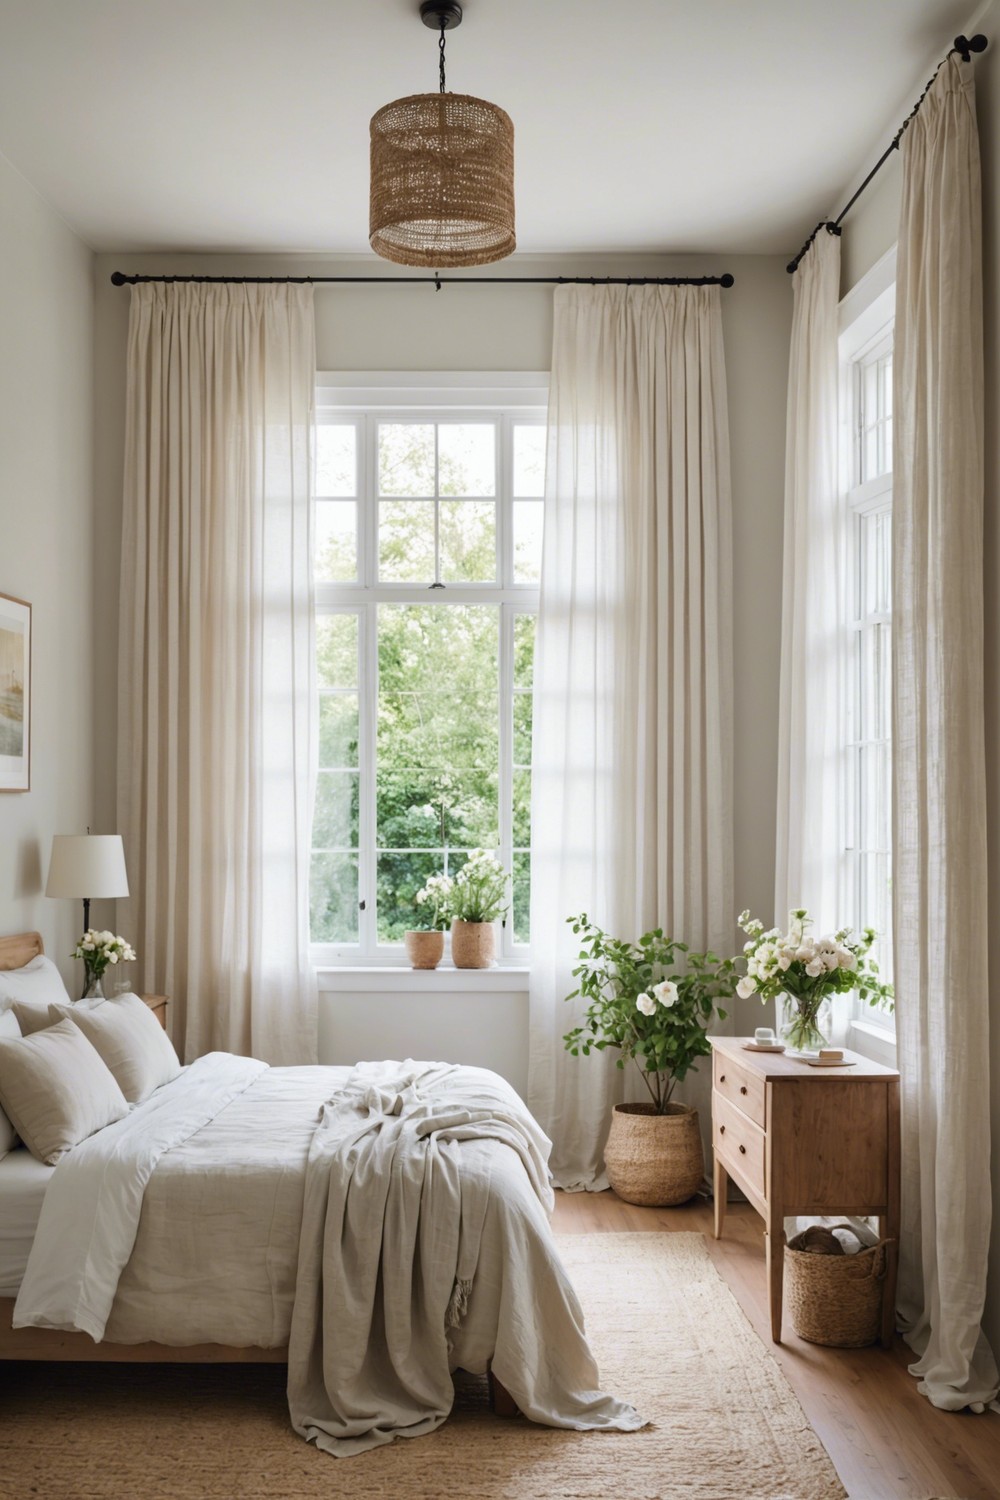 Create a Breezy Feel with Billowy Drapes